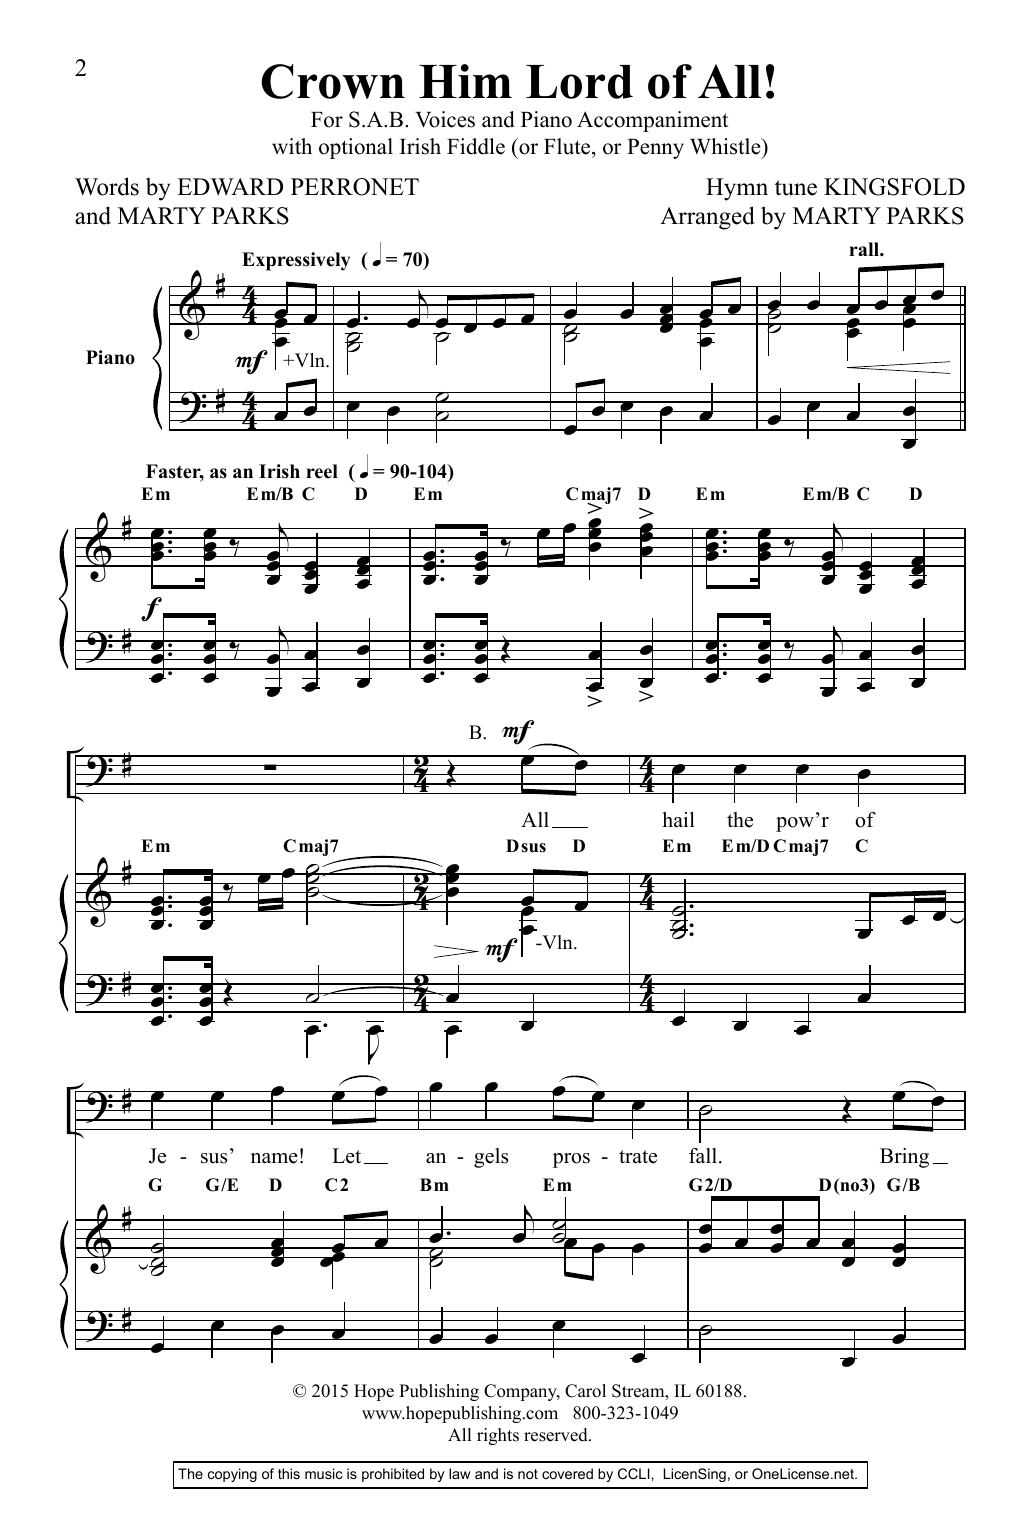 Download Marty Parks Crown Him Lord Of All! Sheet Music